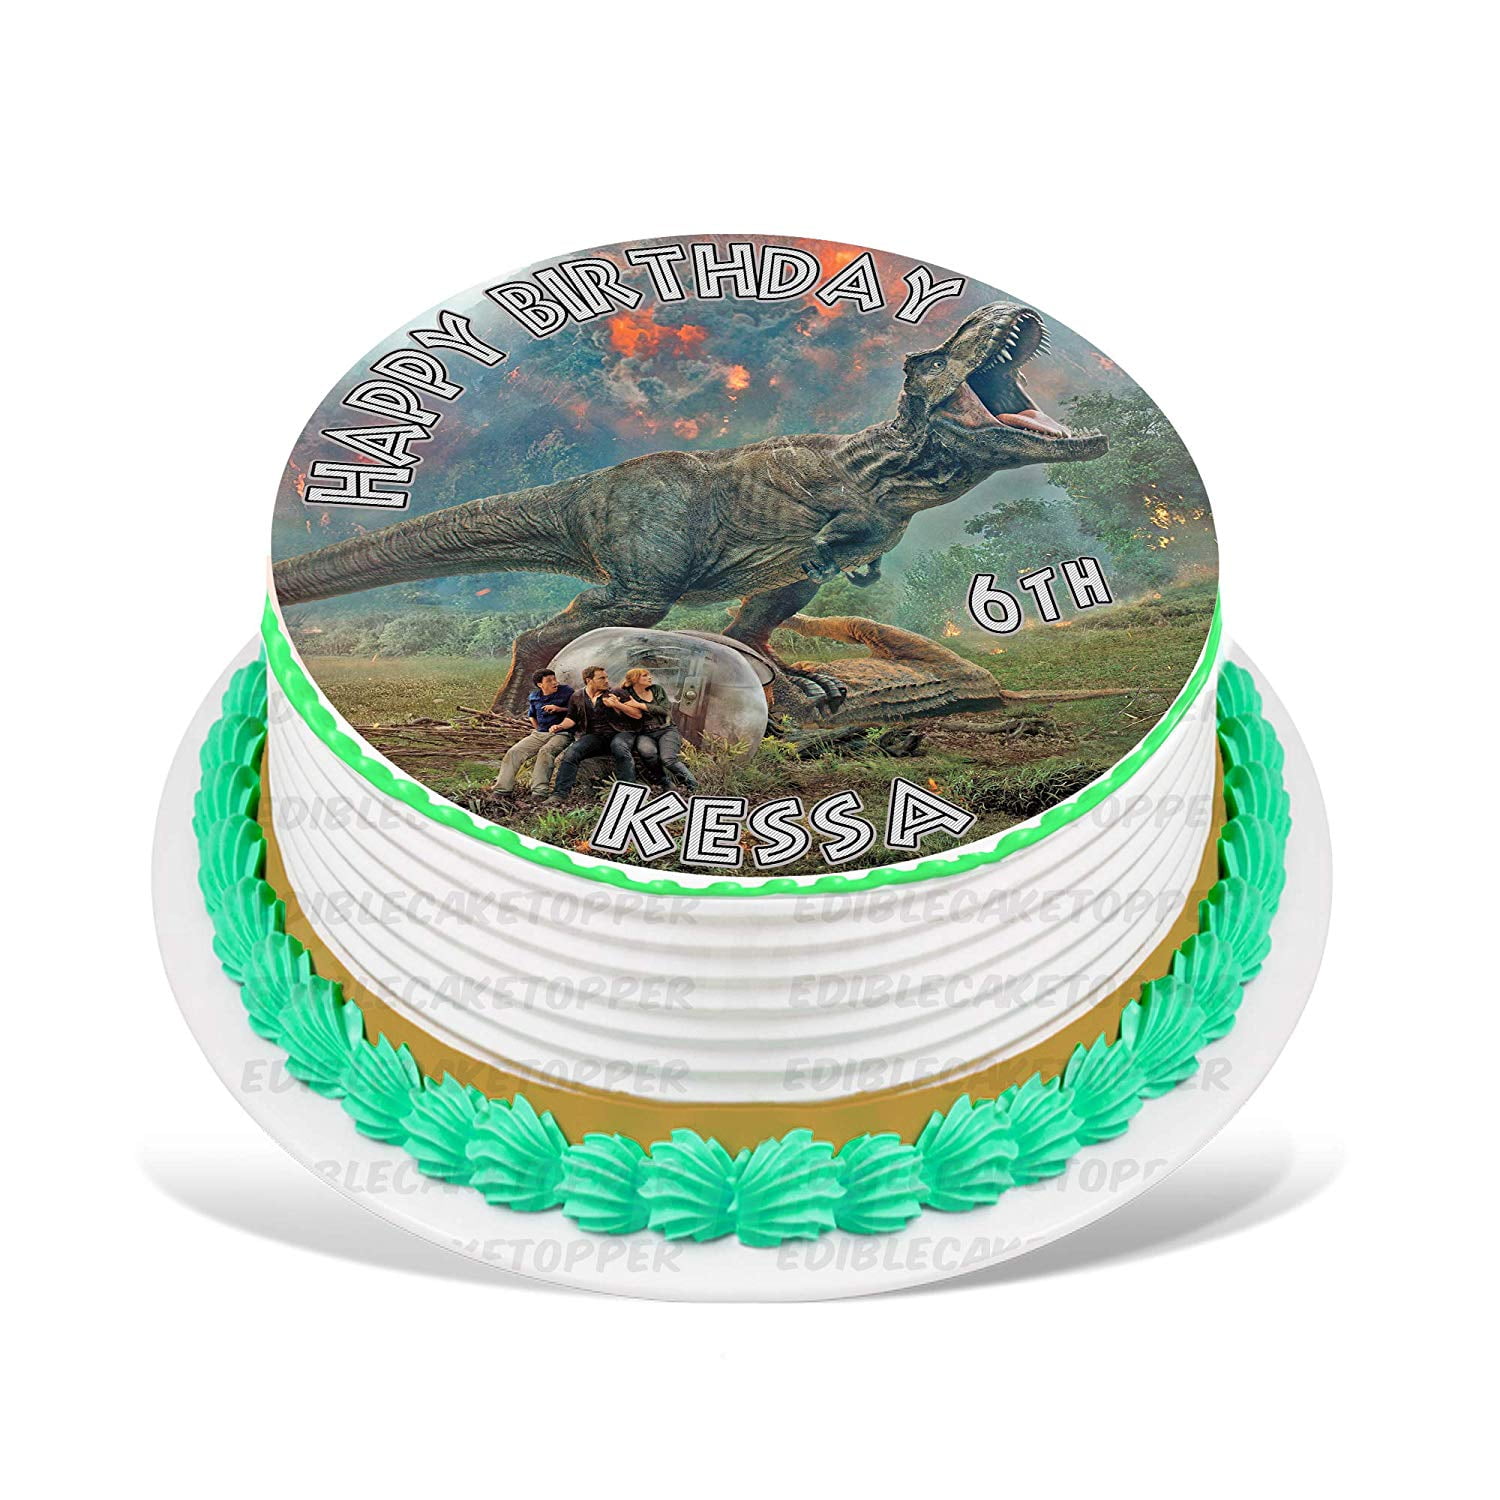 Personalised Jurassic Dinosaurs Scene Edible Icing Birthday Party Cake Topper